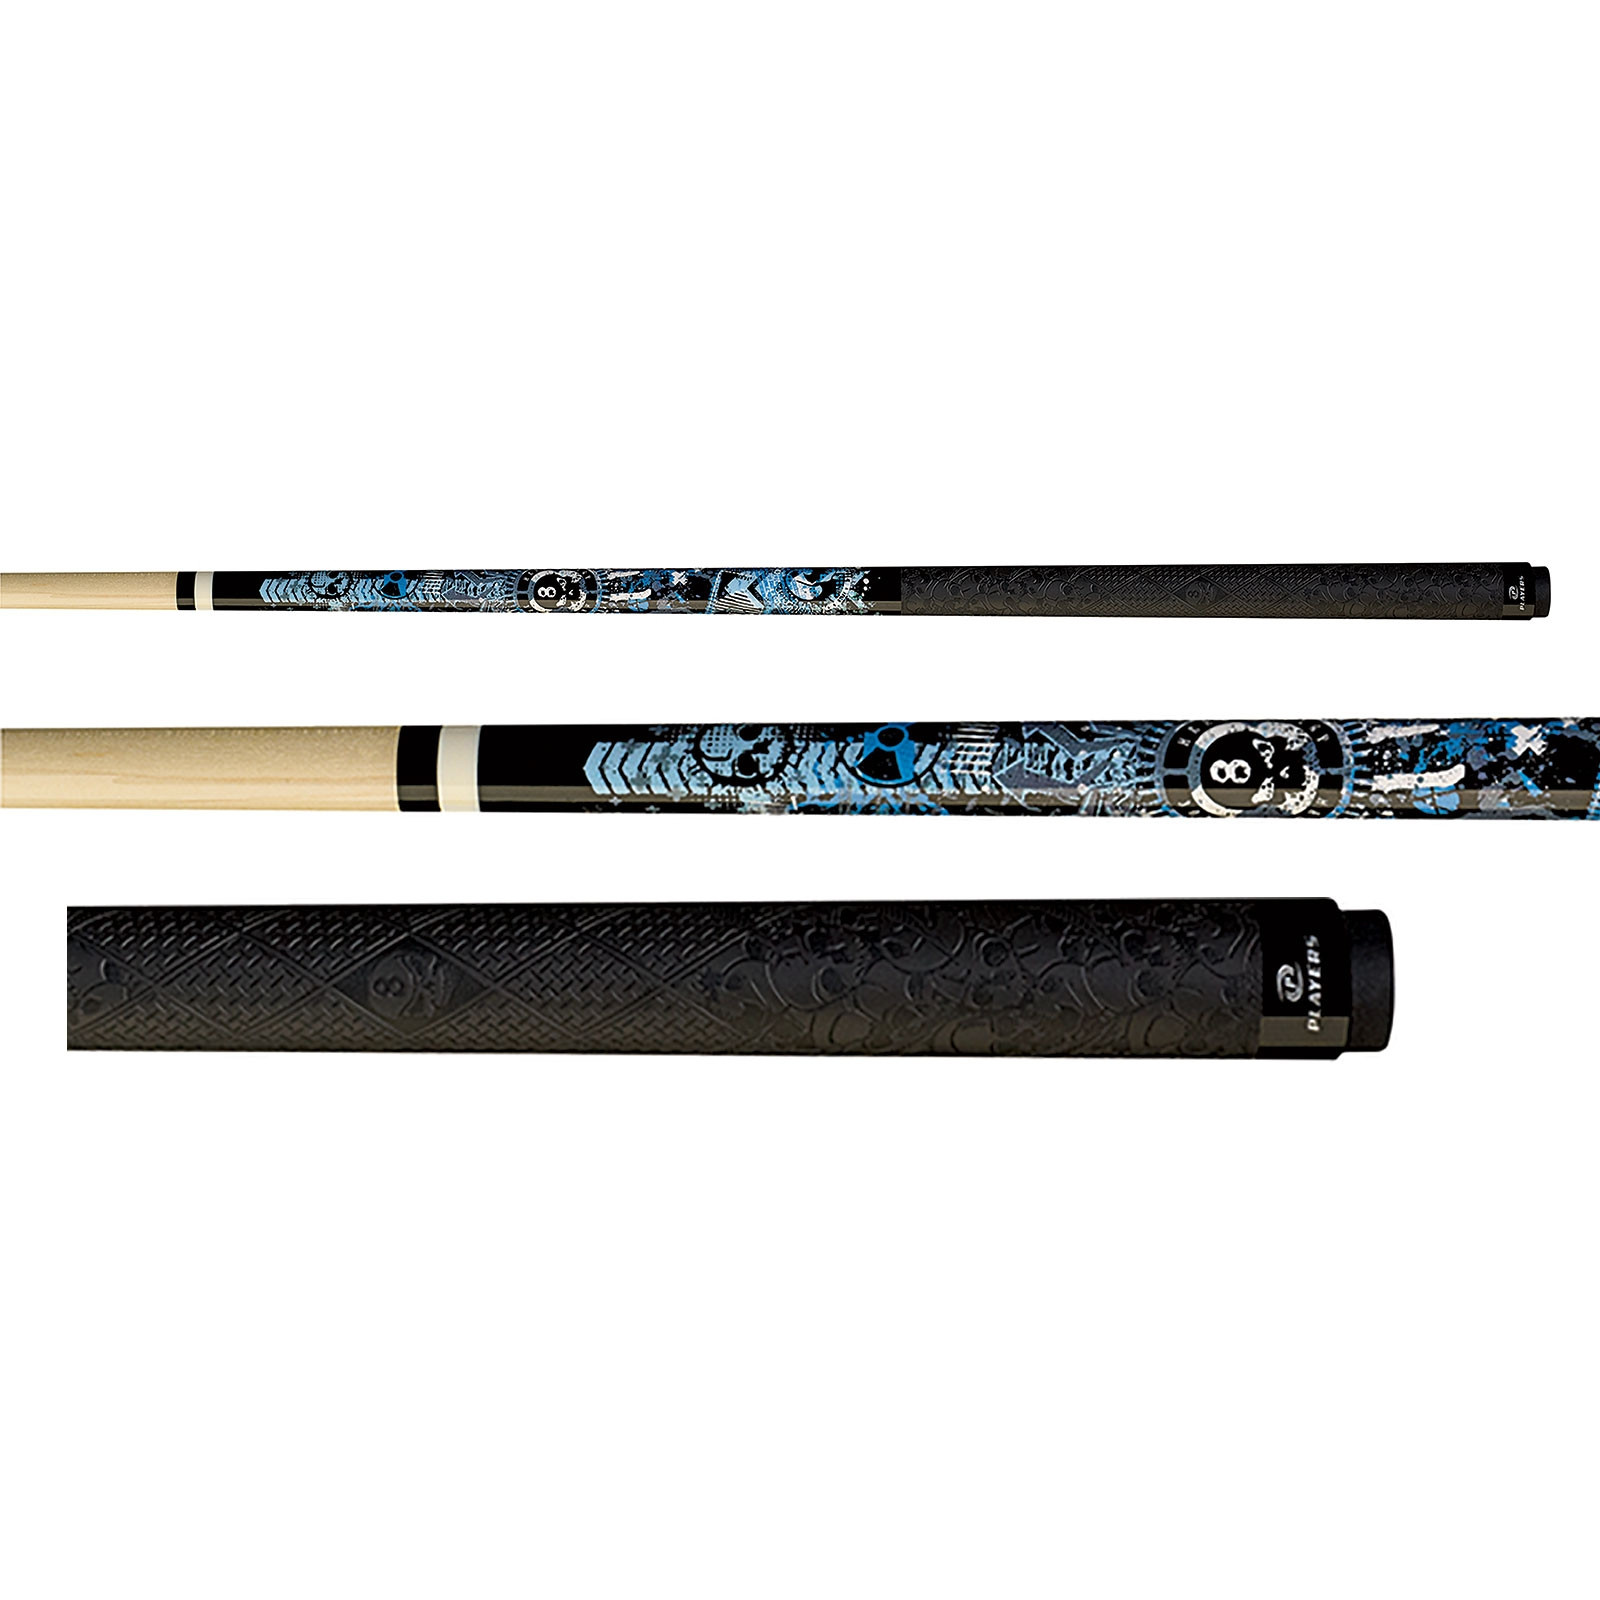 Players D-GFB Anarchy Blue Live Hard Pool Cue Stick